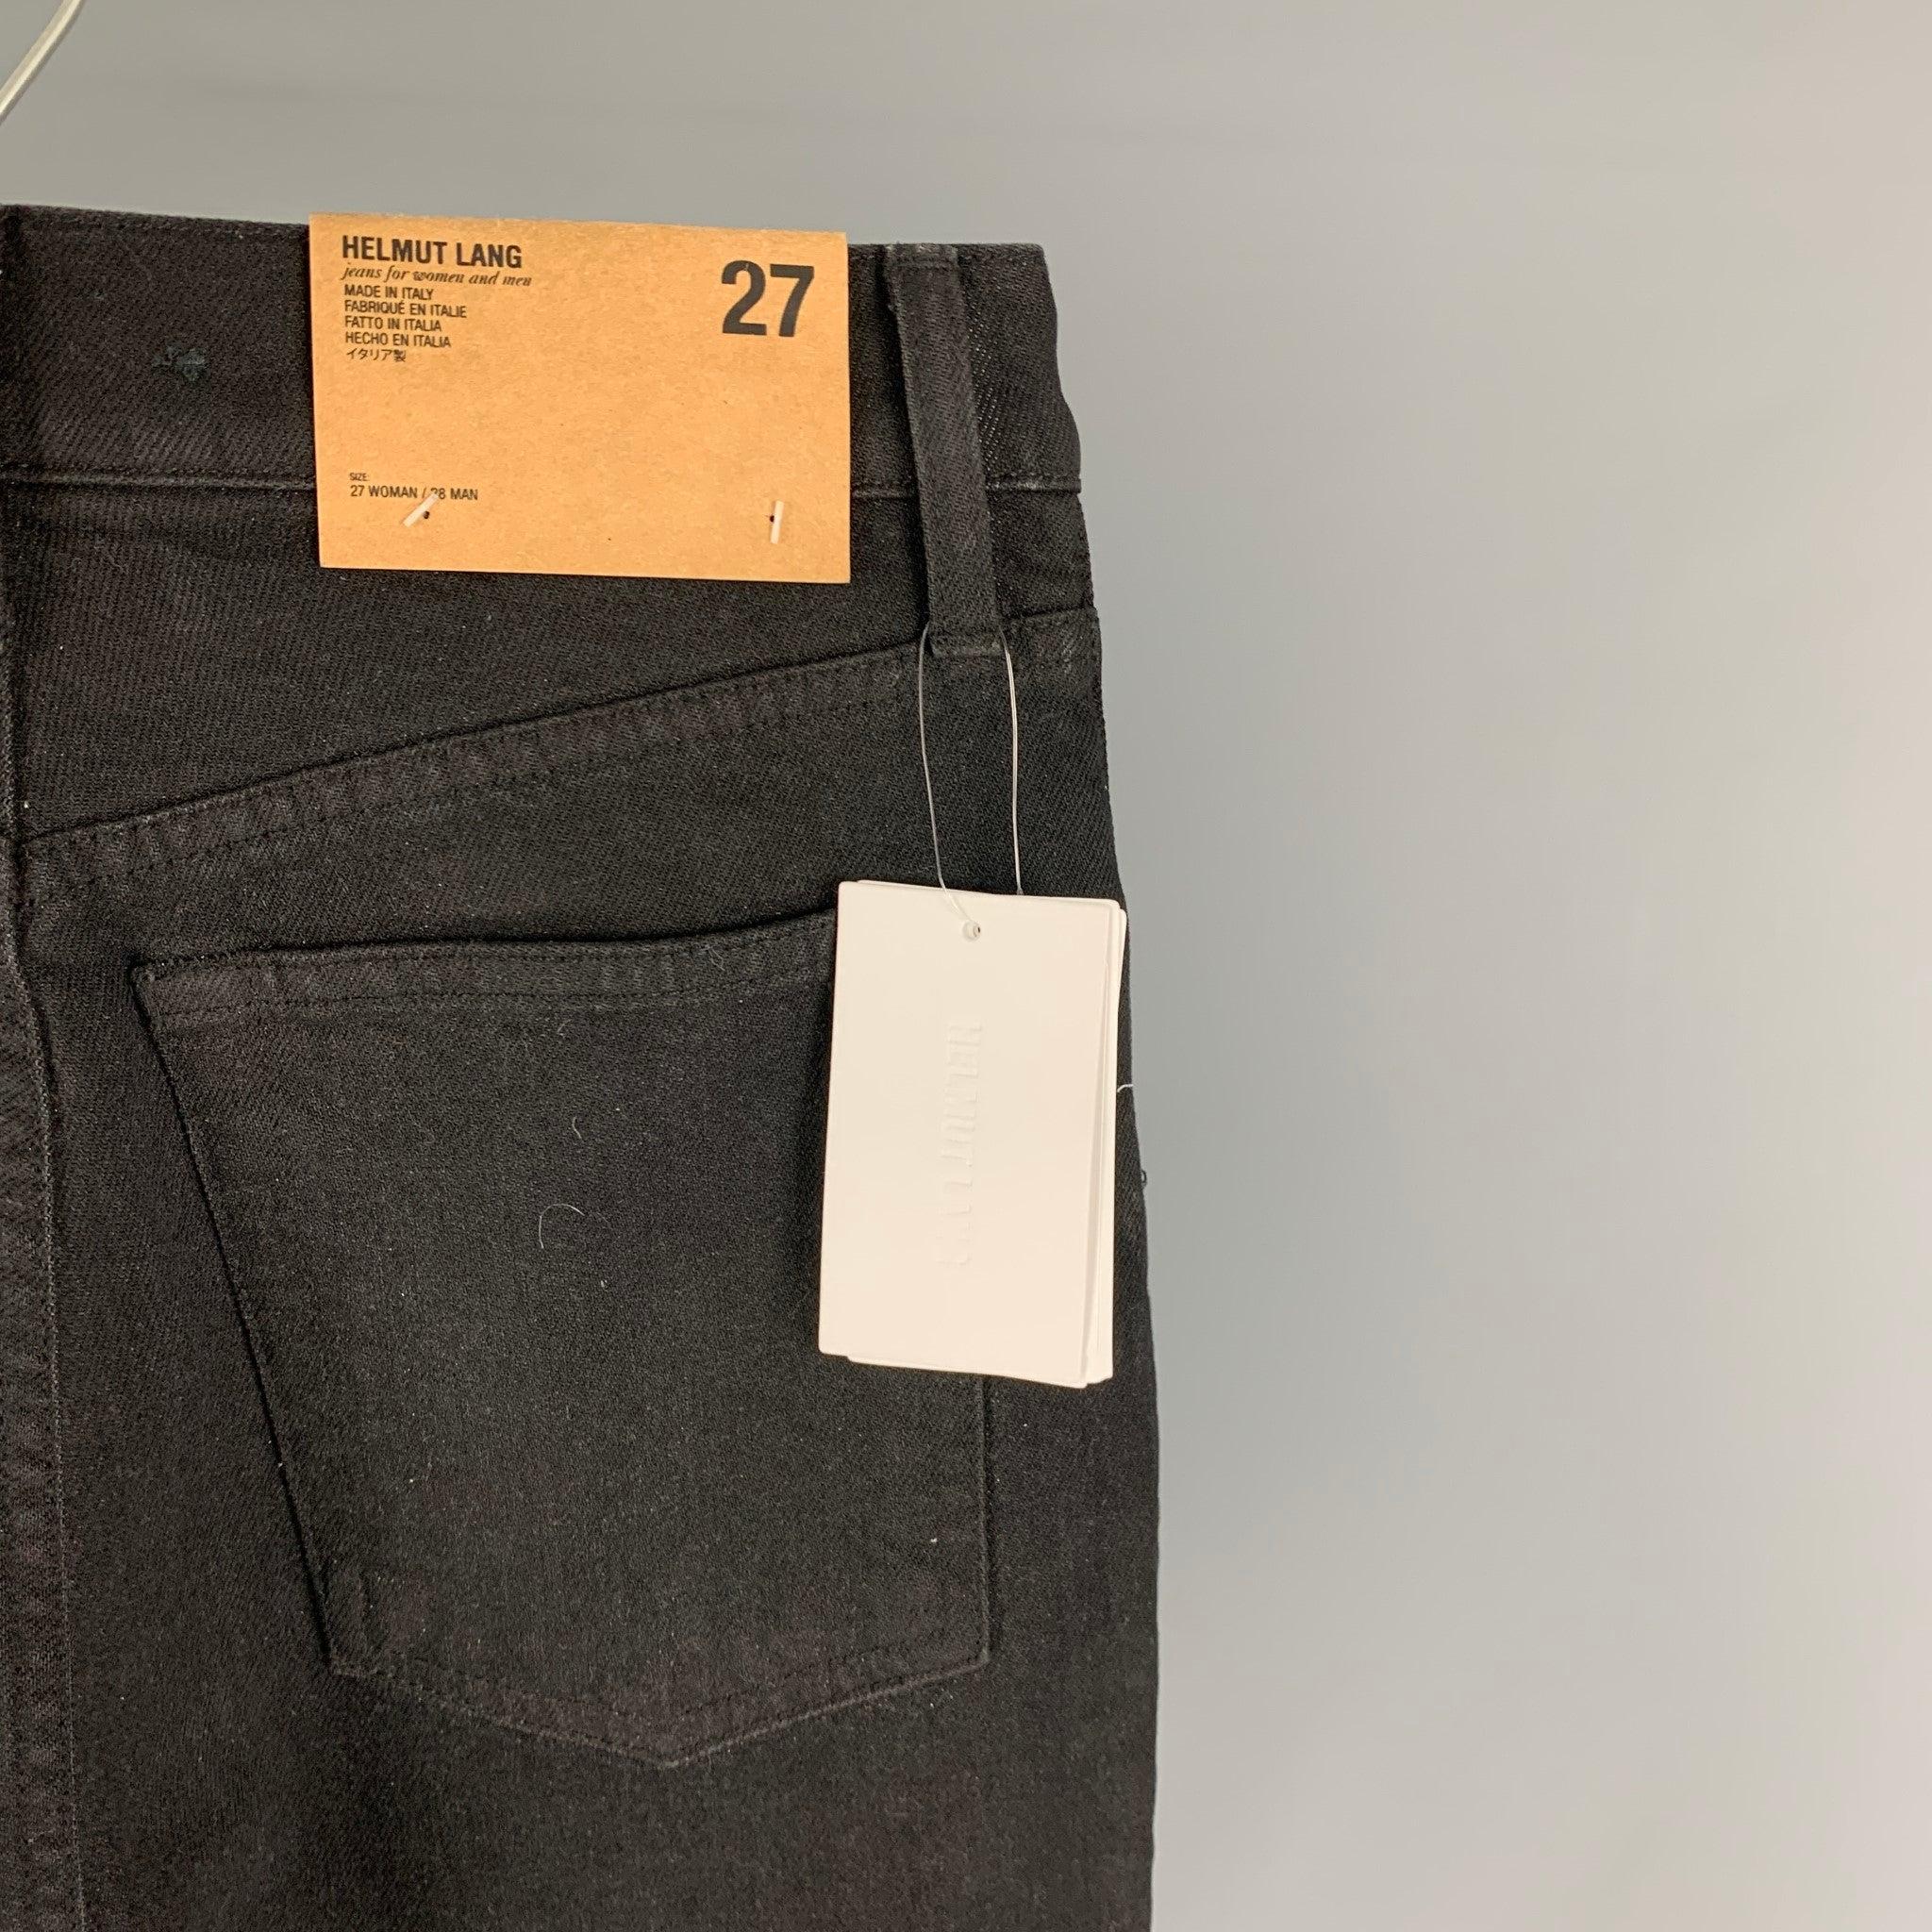 HELMUT LANG Size 27 Black Cotton Femme Hi Spikes Jeans In Good Condition For Sale In San Francisco, CA